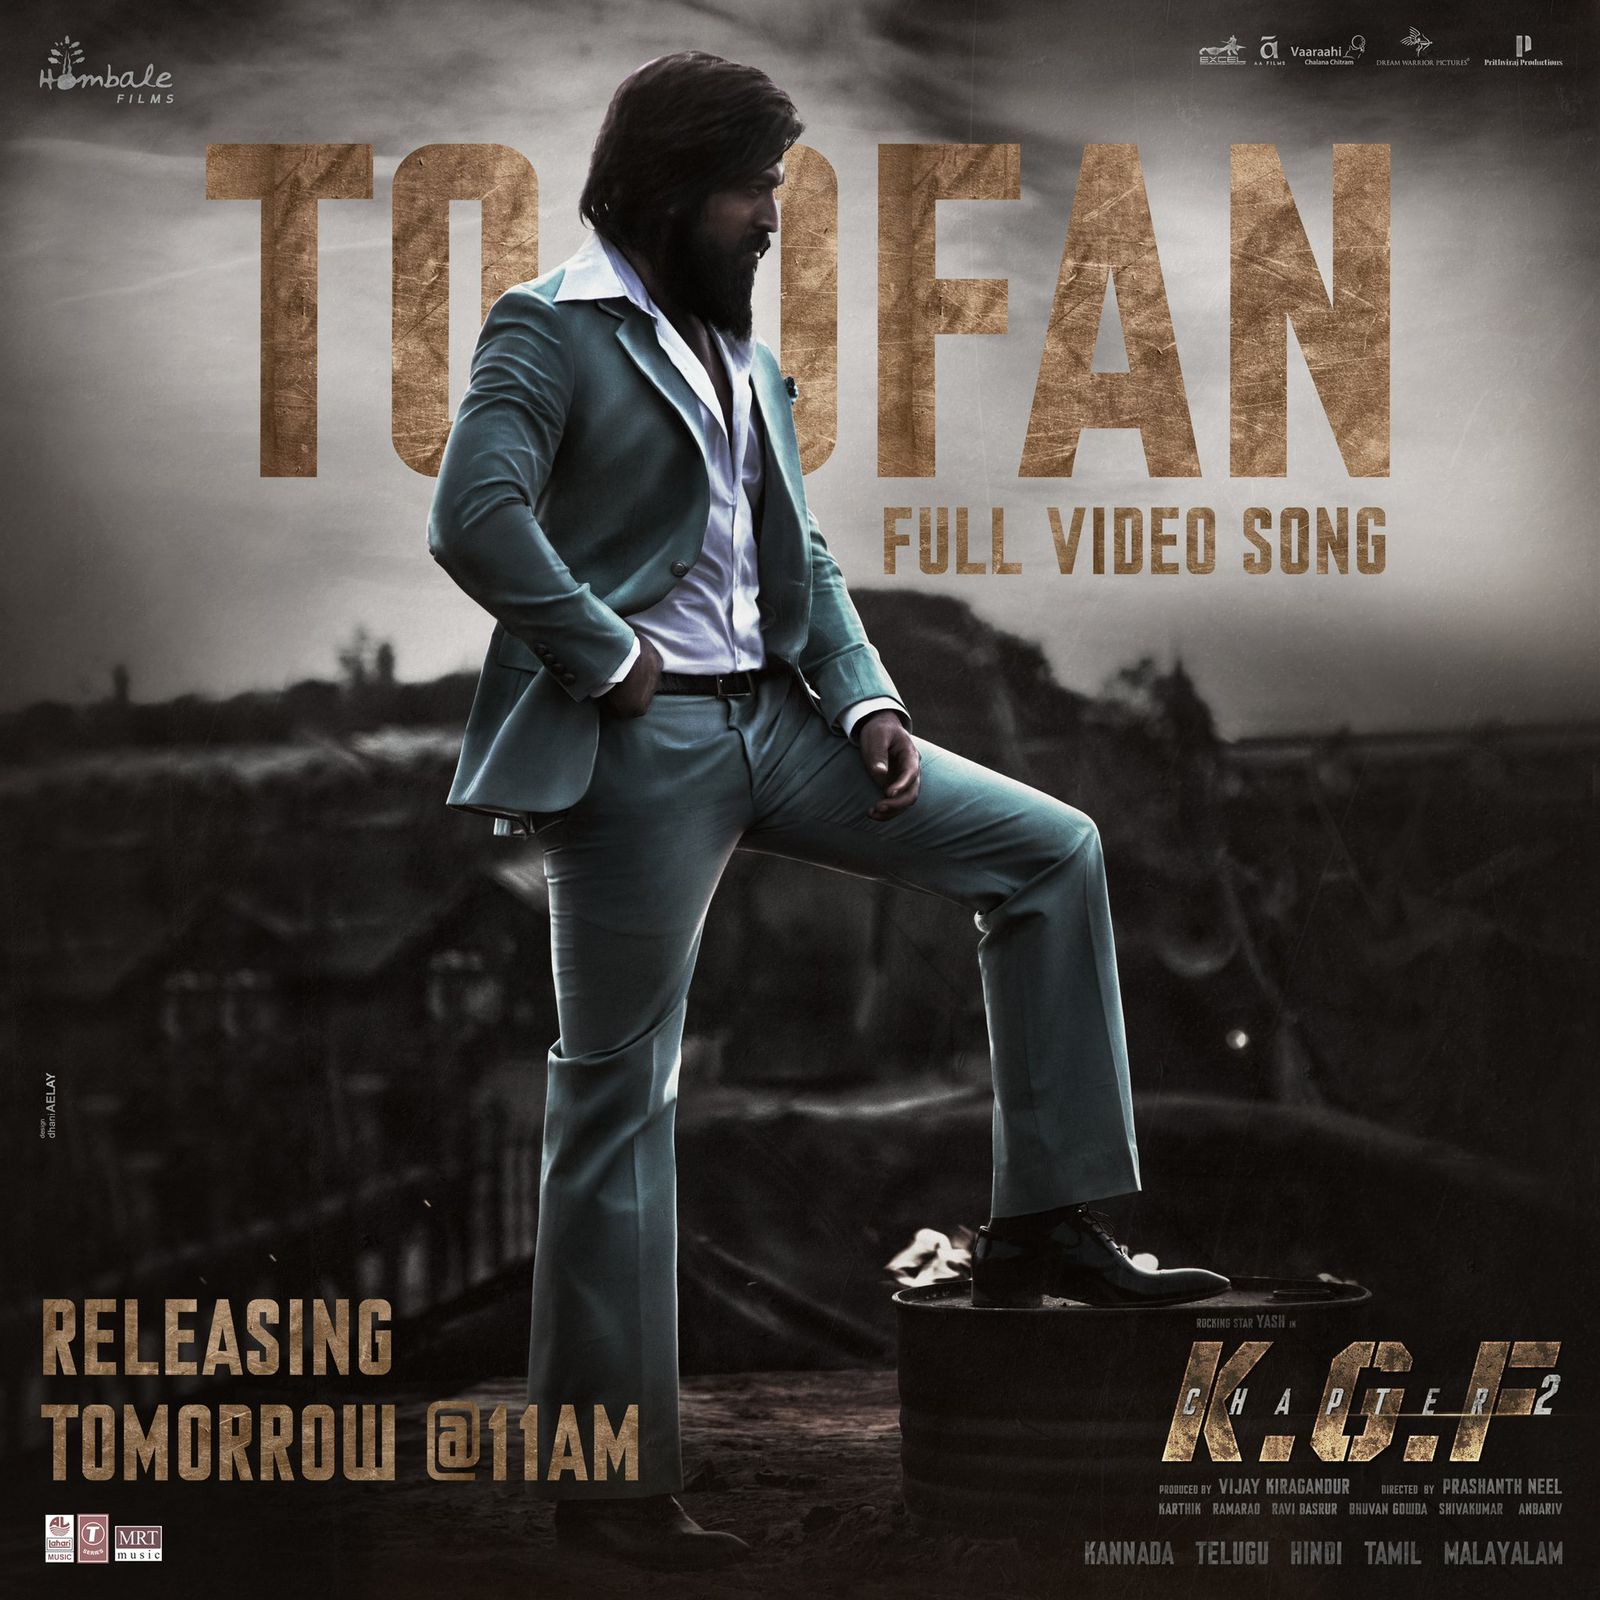 Toofan (KGF Chapter 2) Full Video Song Hindi 2160p 4K | 1080p | 720p HDRip For Free Download